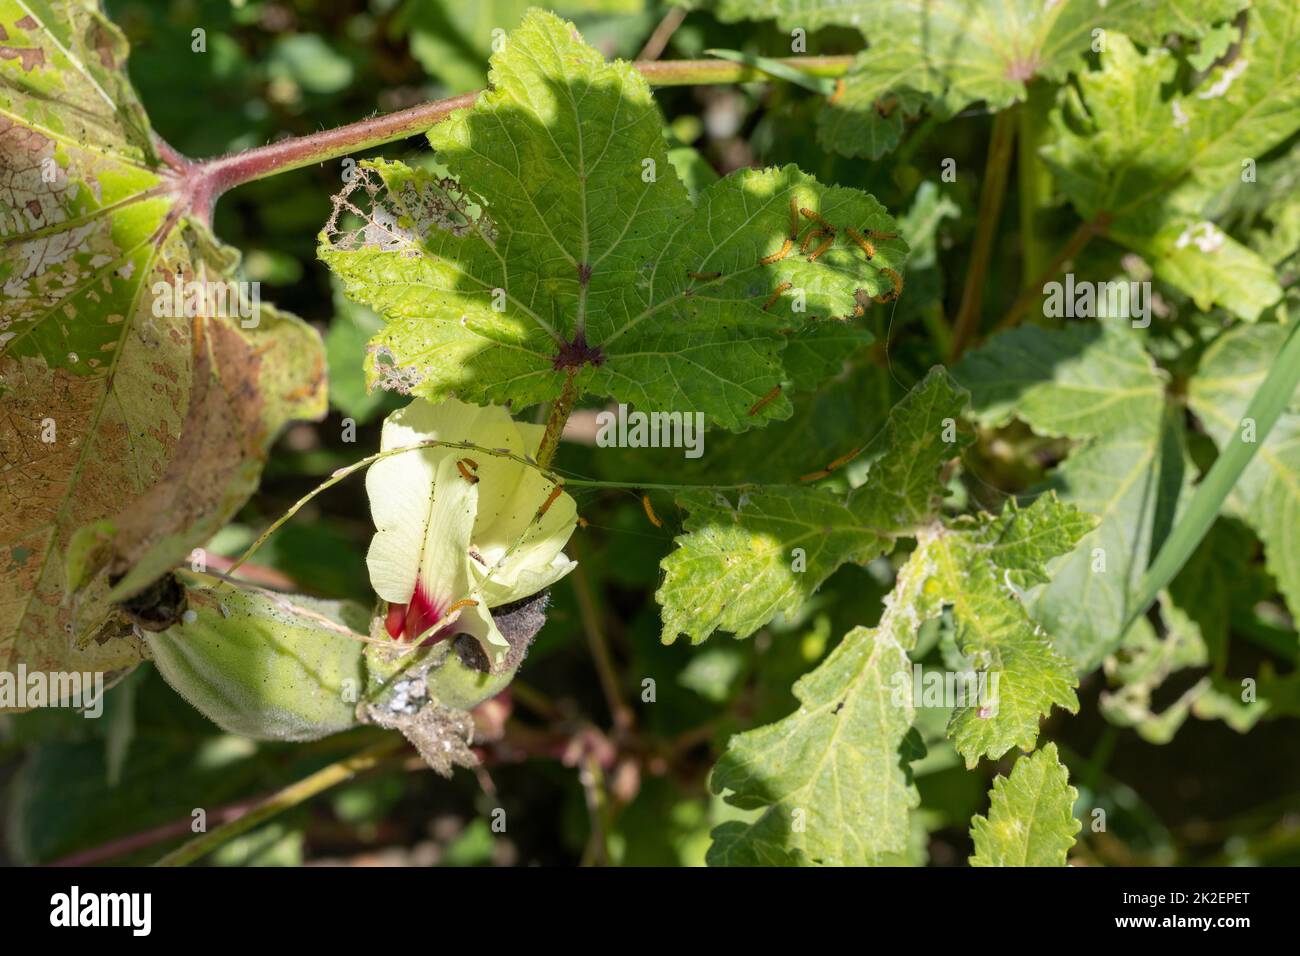 Insects and pests damages the okra crop in the field Stock Photo